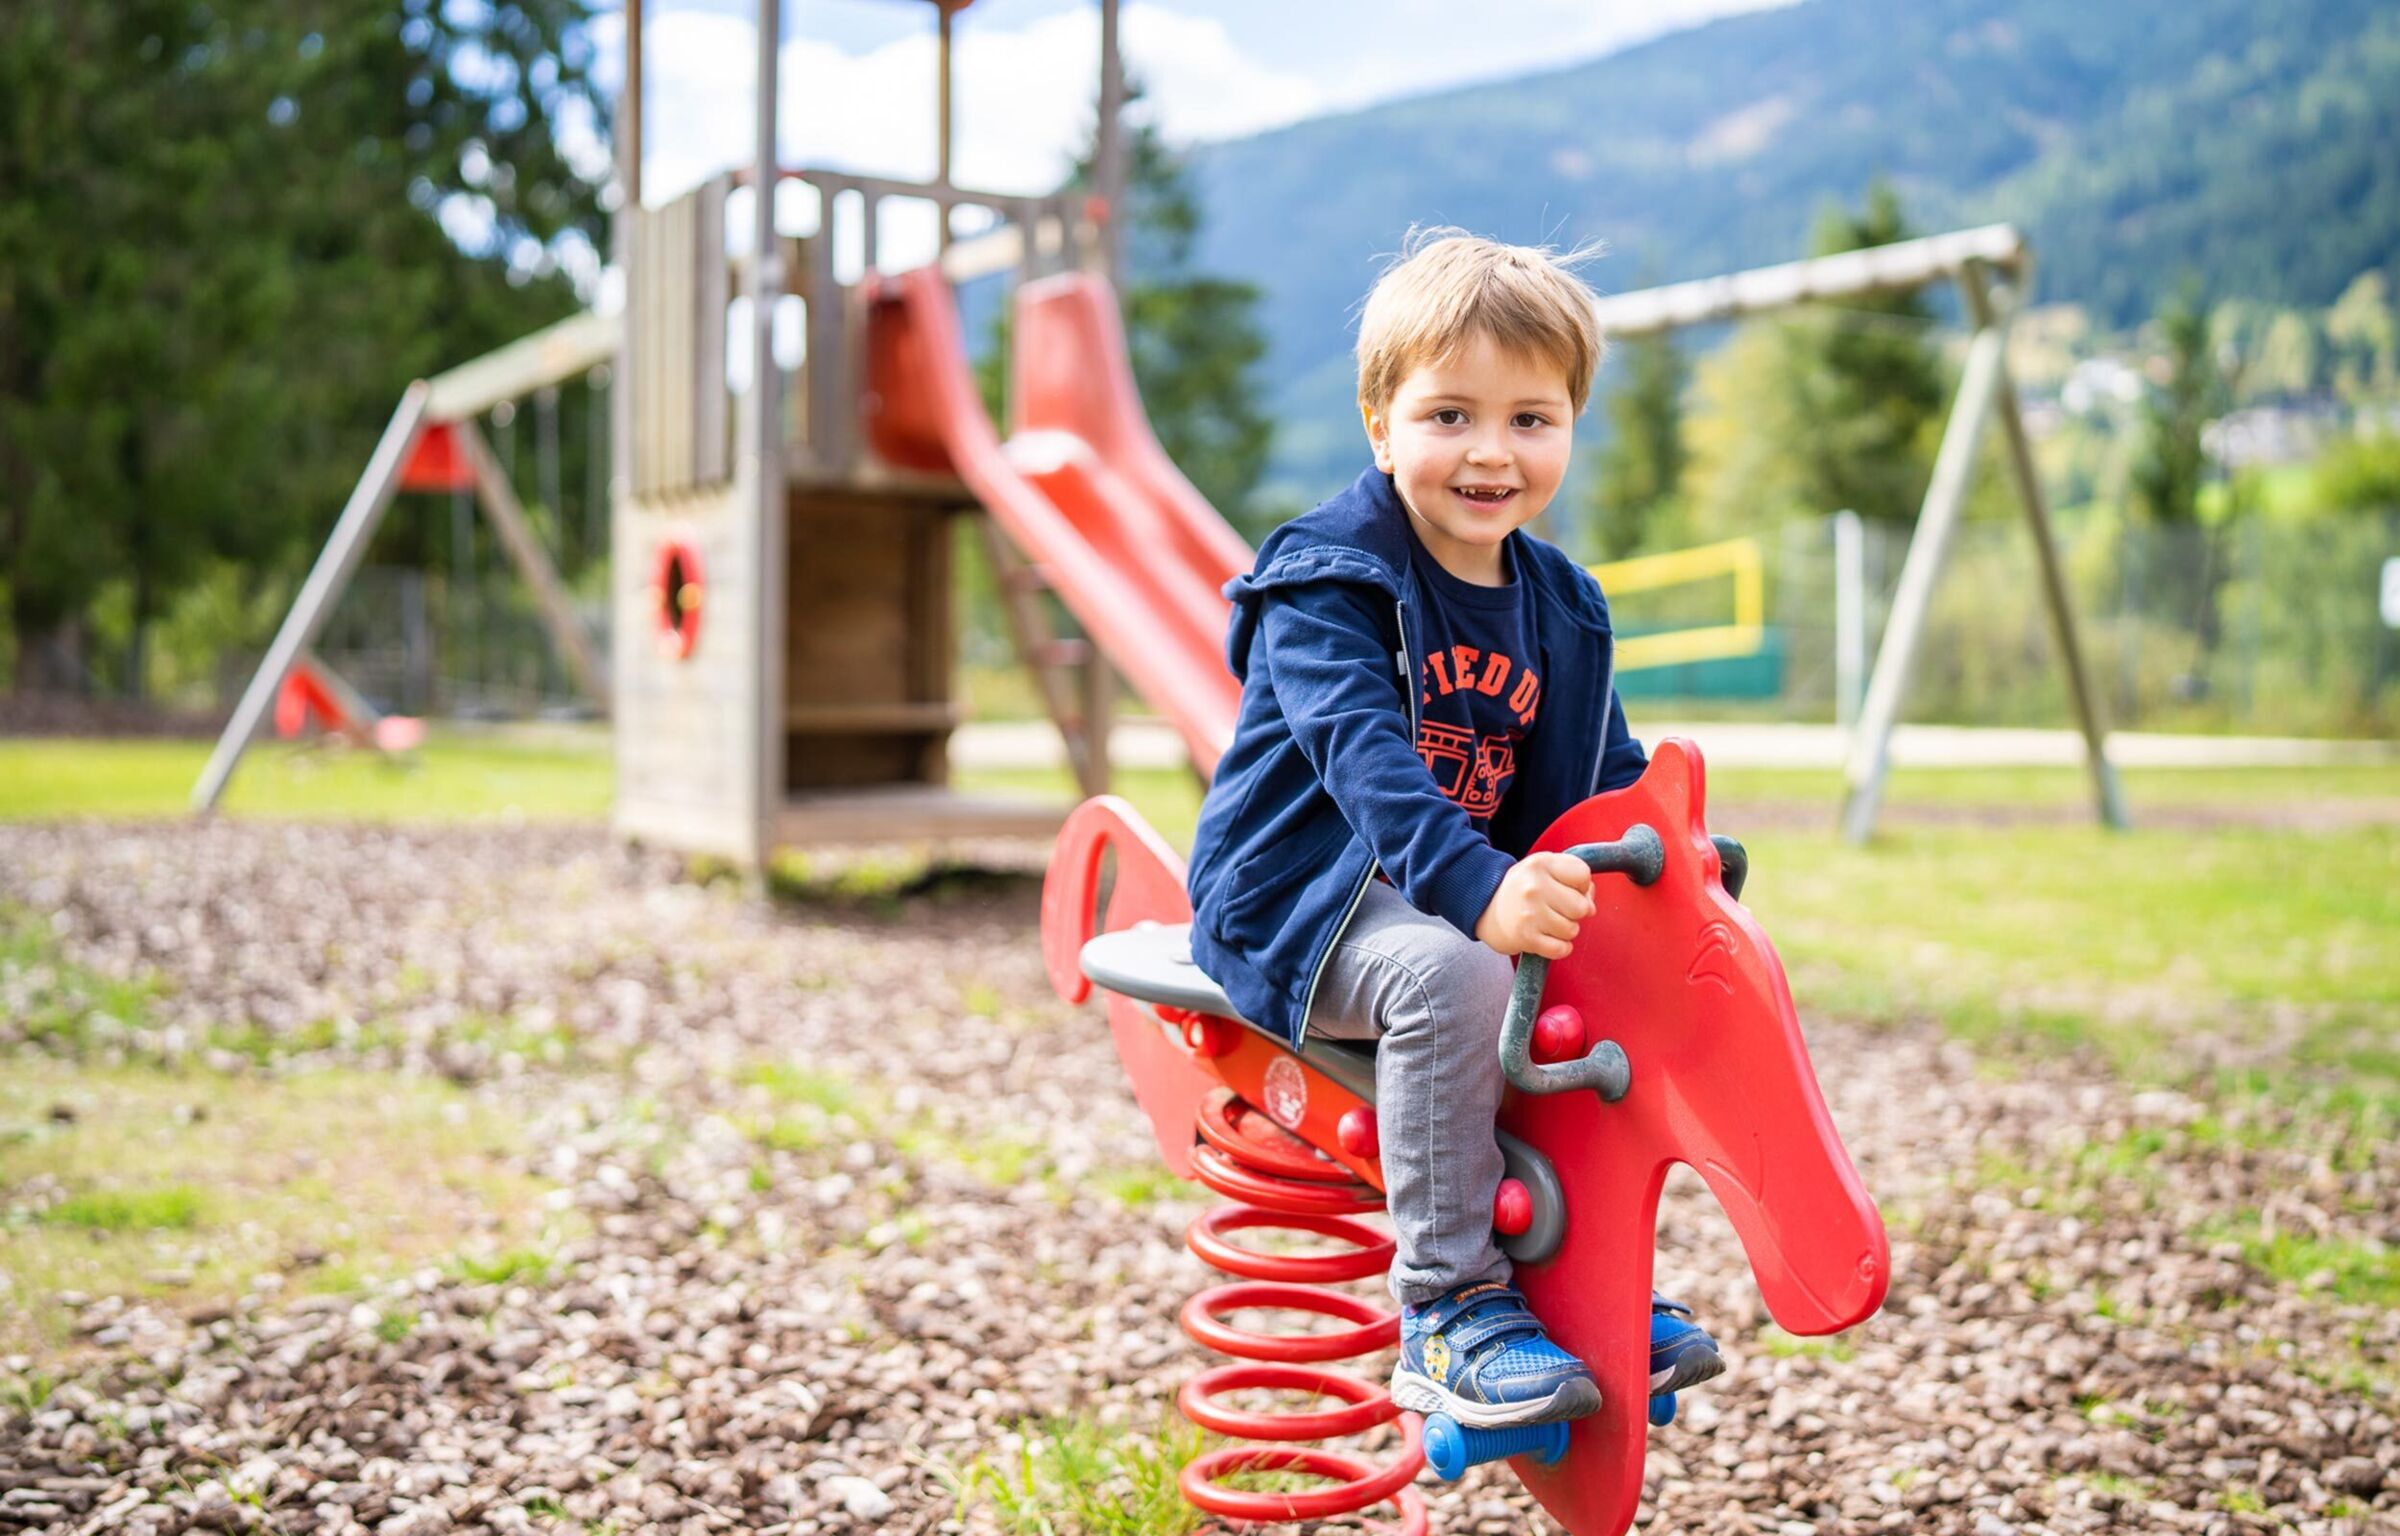 A boy at the playground sits on a spring seesaw.